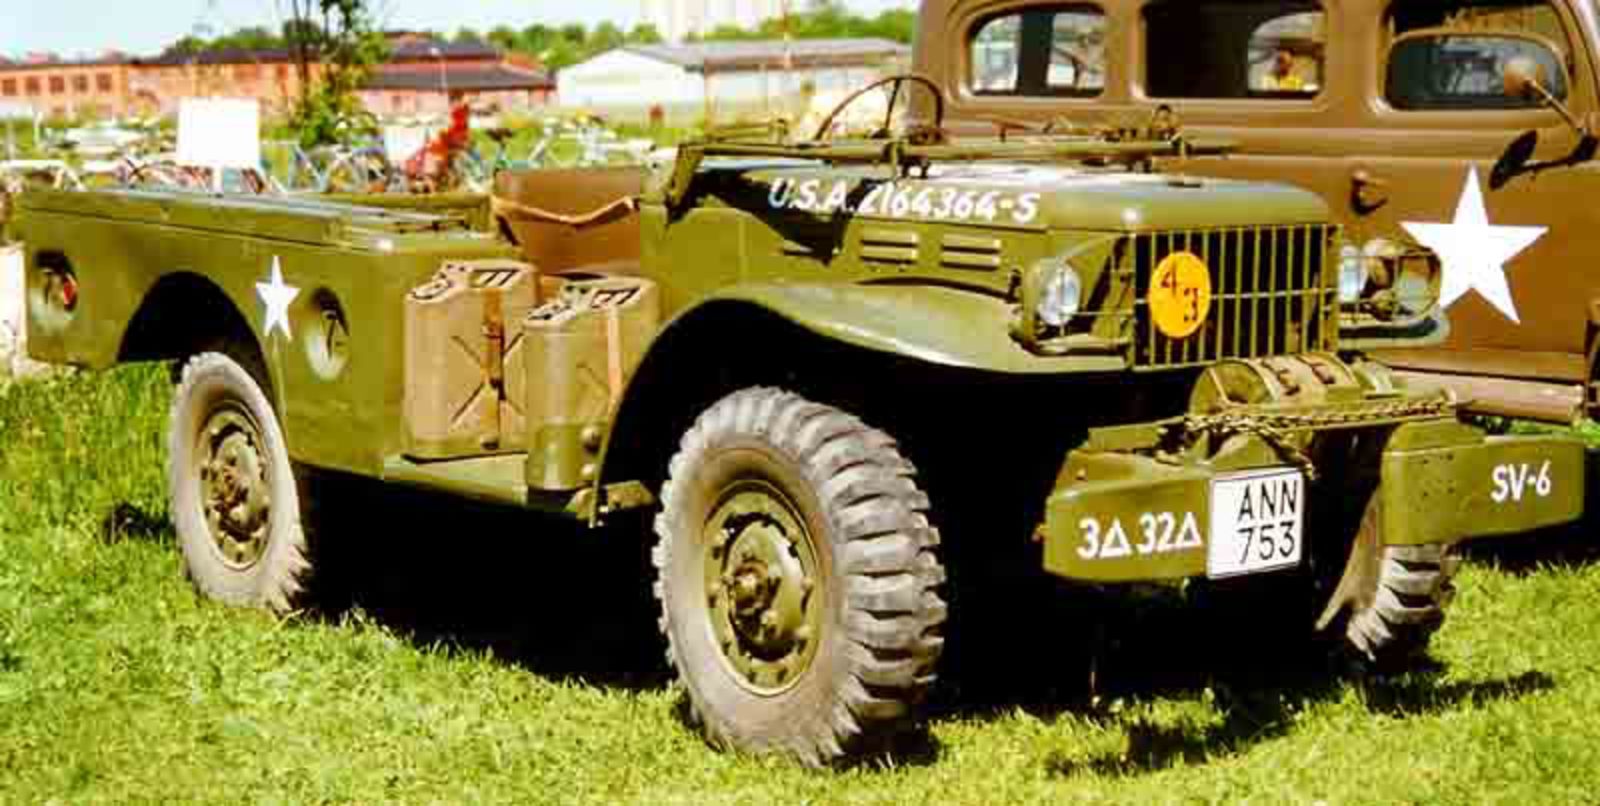 Dodge Weapon Carrier